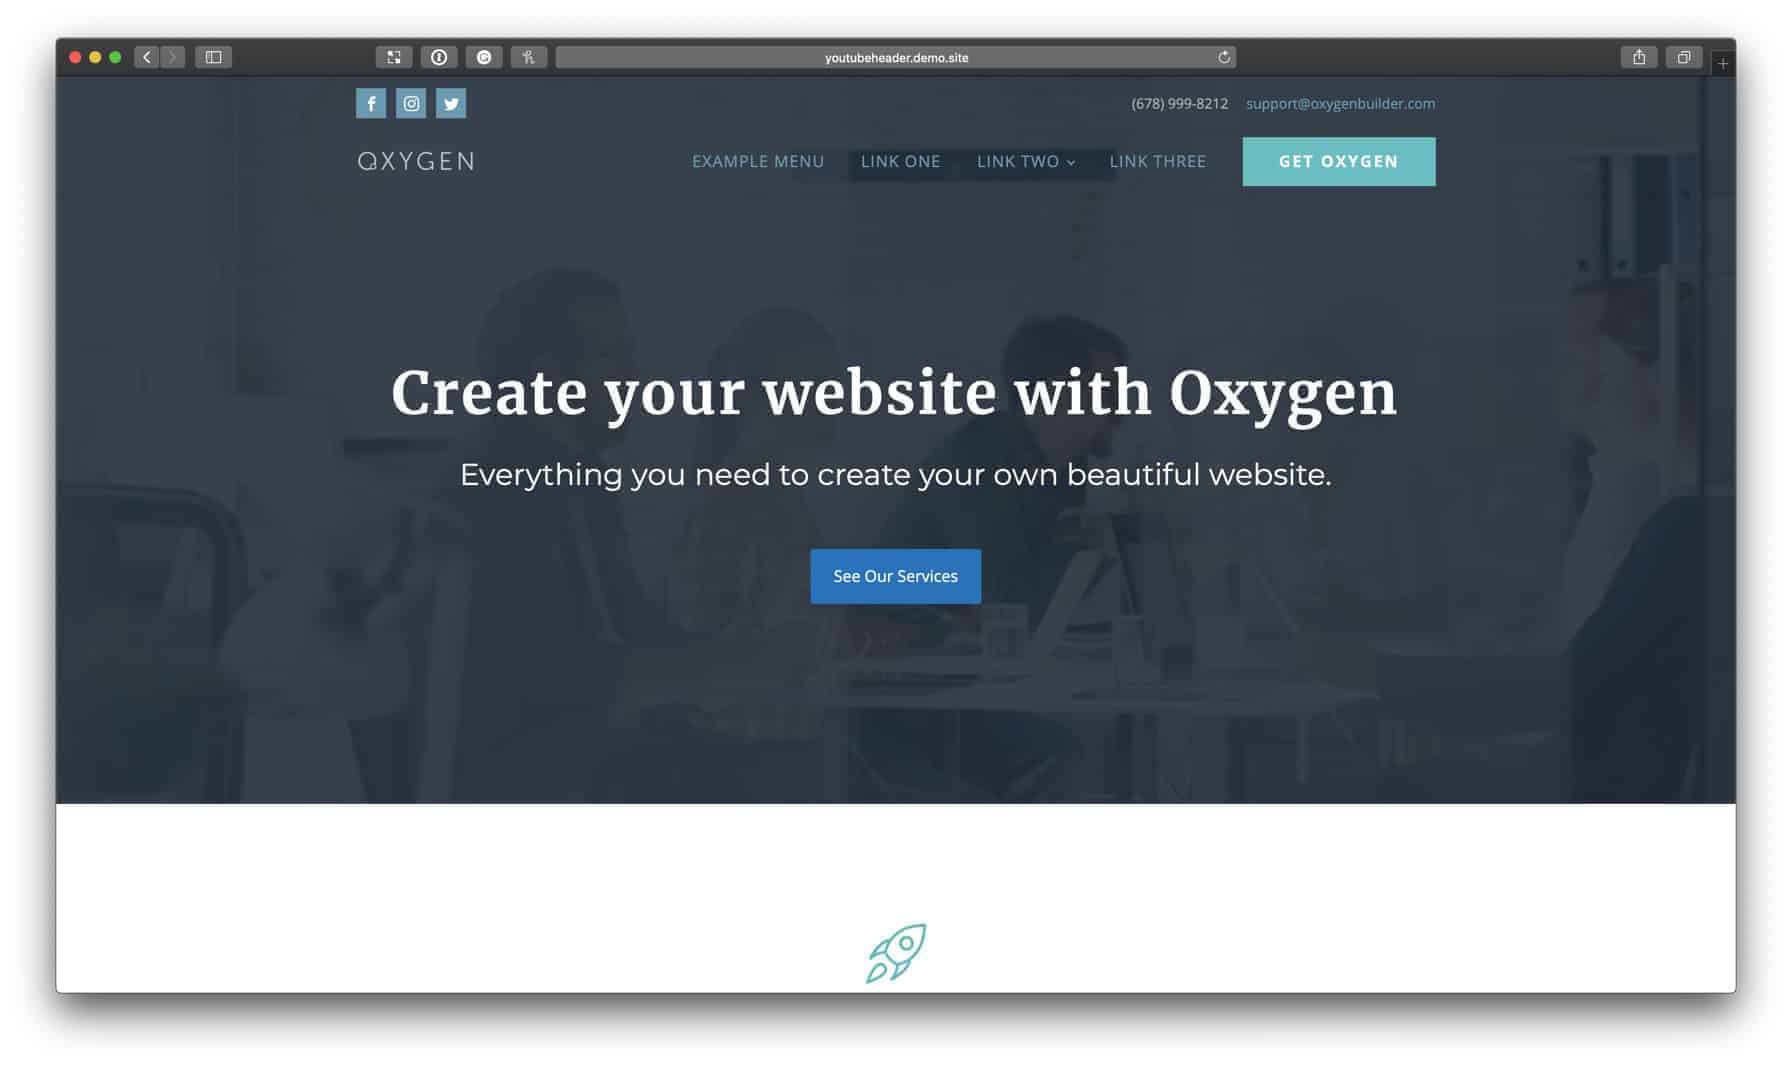 Video Background for Homepage Hero in Oxygen